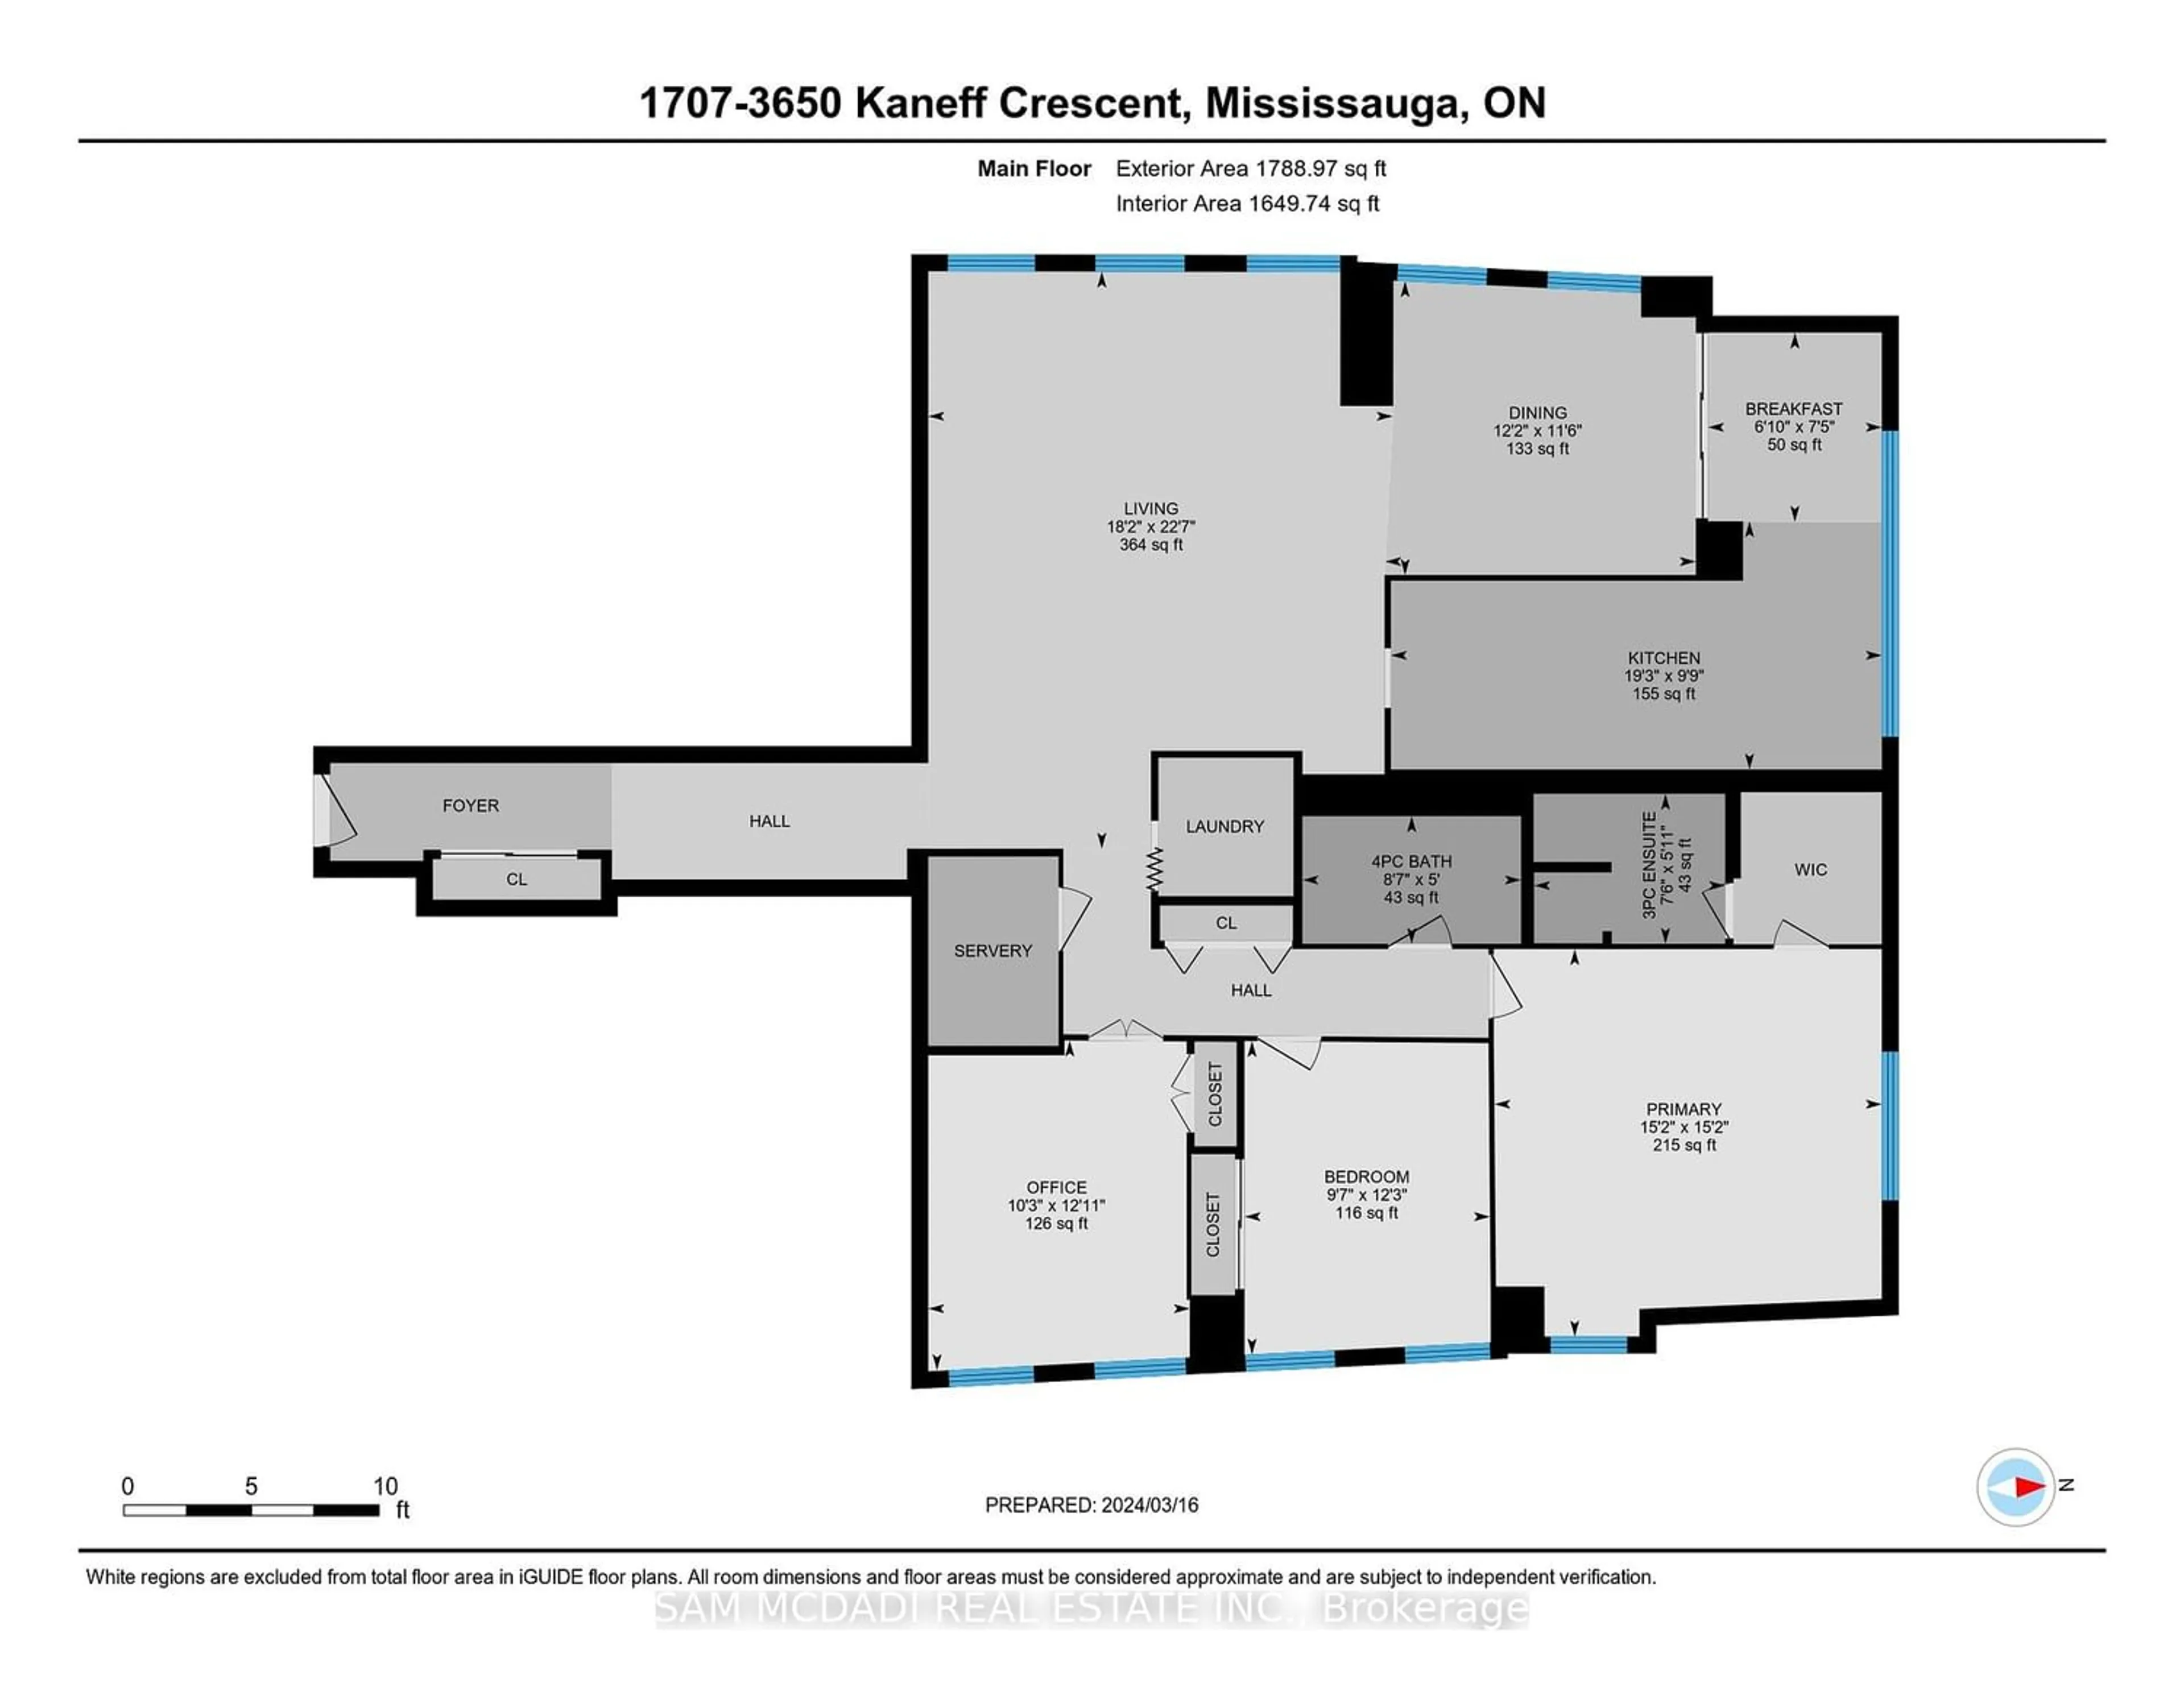 Floor plan for 3650 Kaneff Cres #1707, Mississauga Ontario L5A 4A1